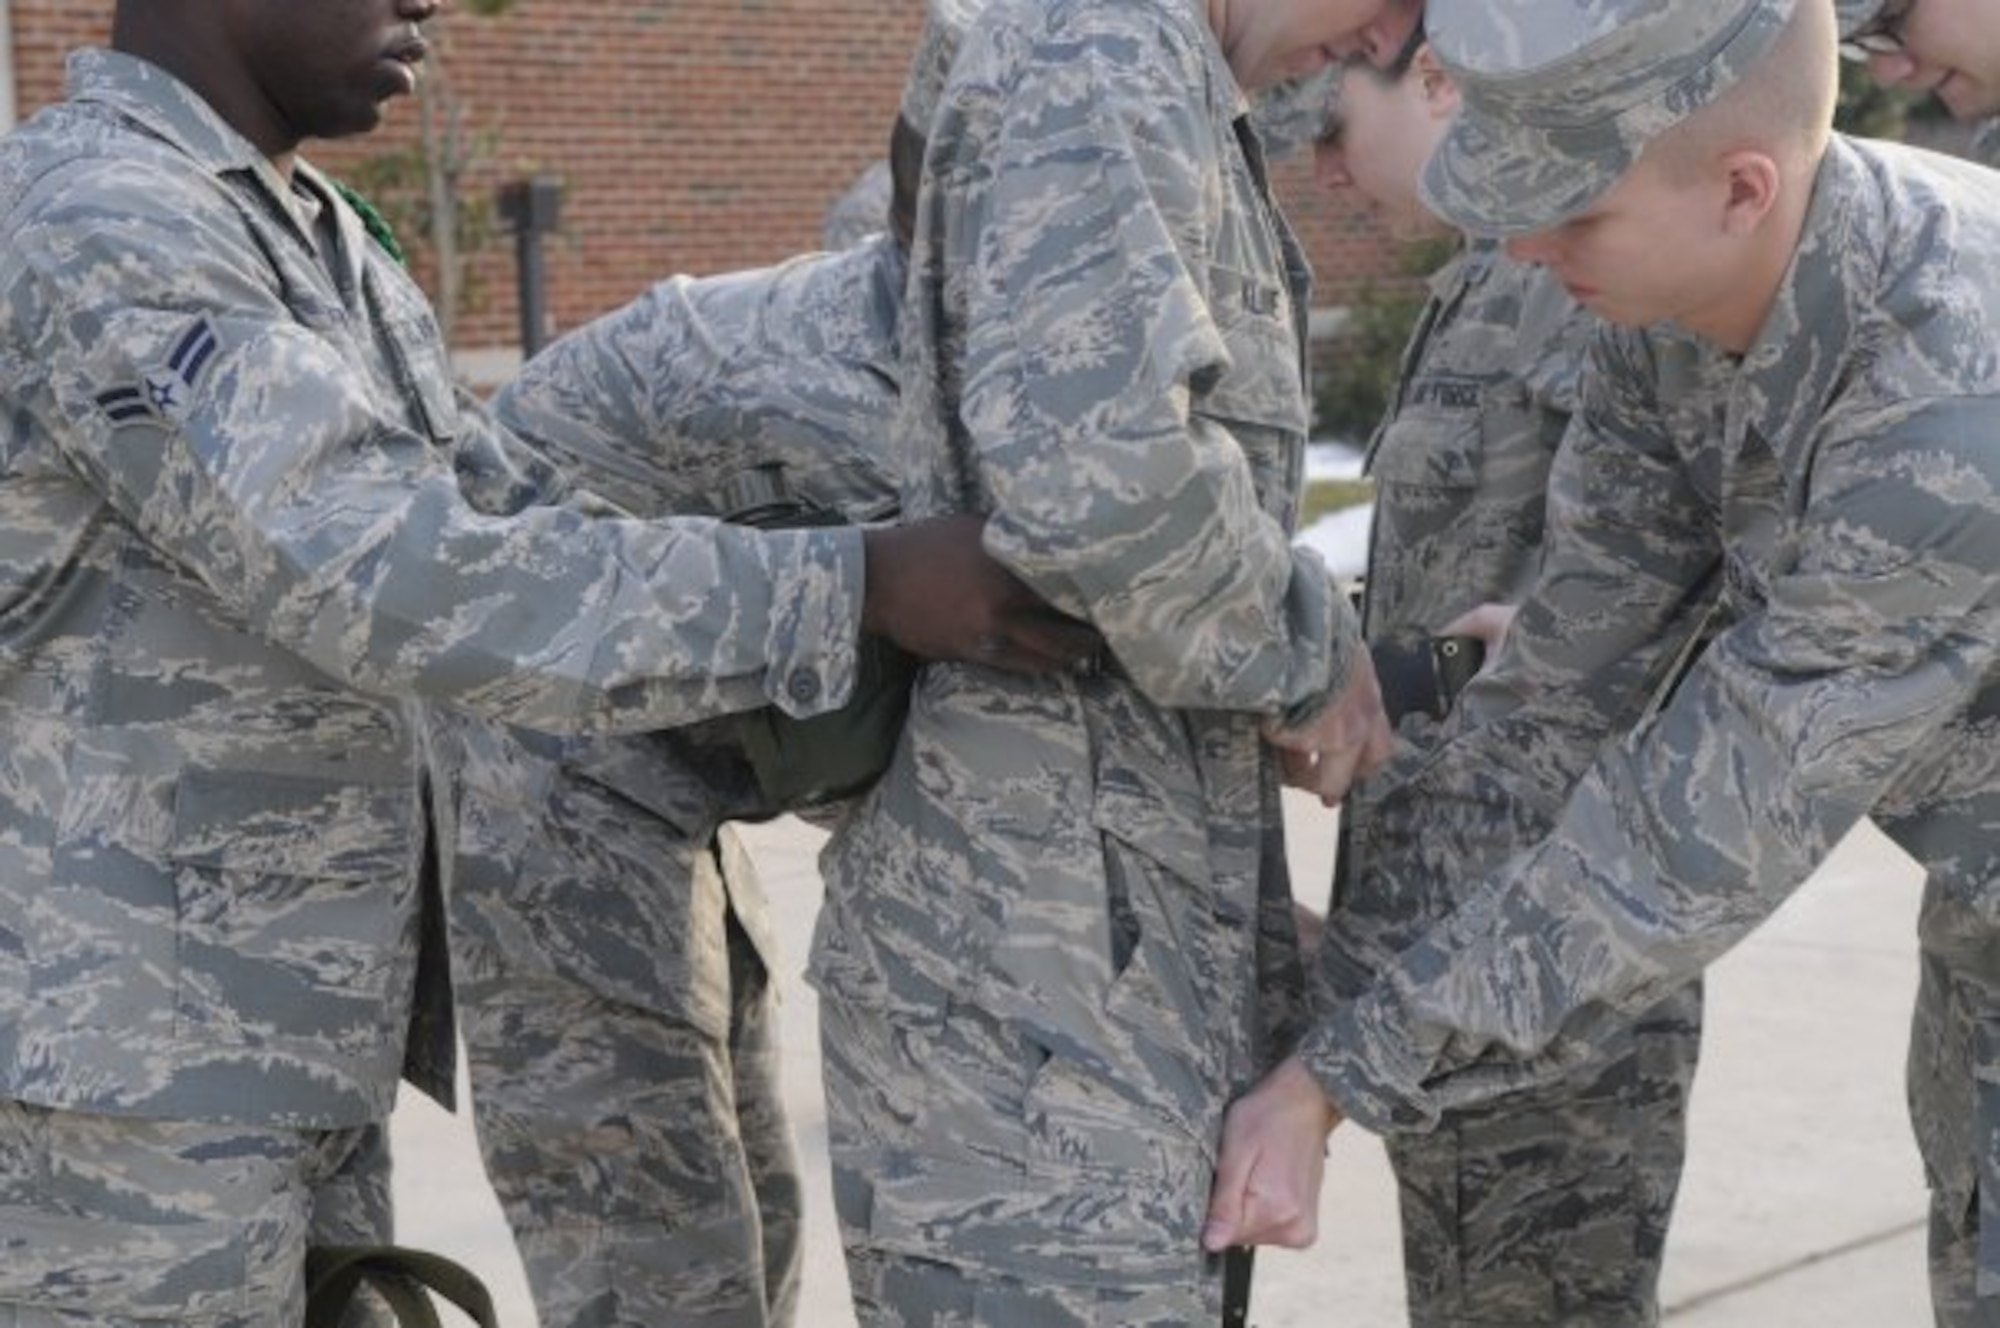 United States Air Force Honor Guard technical school trainees help each other put on their canteen belts, Feb. 22, 2010, outside of the Honor Guard dorms on Bolling Air Force Base, D.C. While wearing the canteen belts, trainees' uniforms must be pulled and creased properly in order to contain a professional appearance. (U.S. Air Force photo by Senior Airman Marleah Miller)